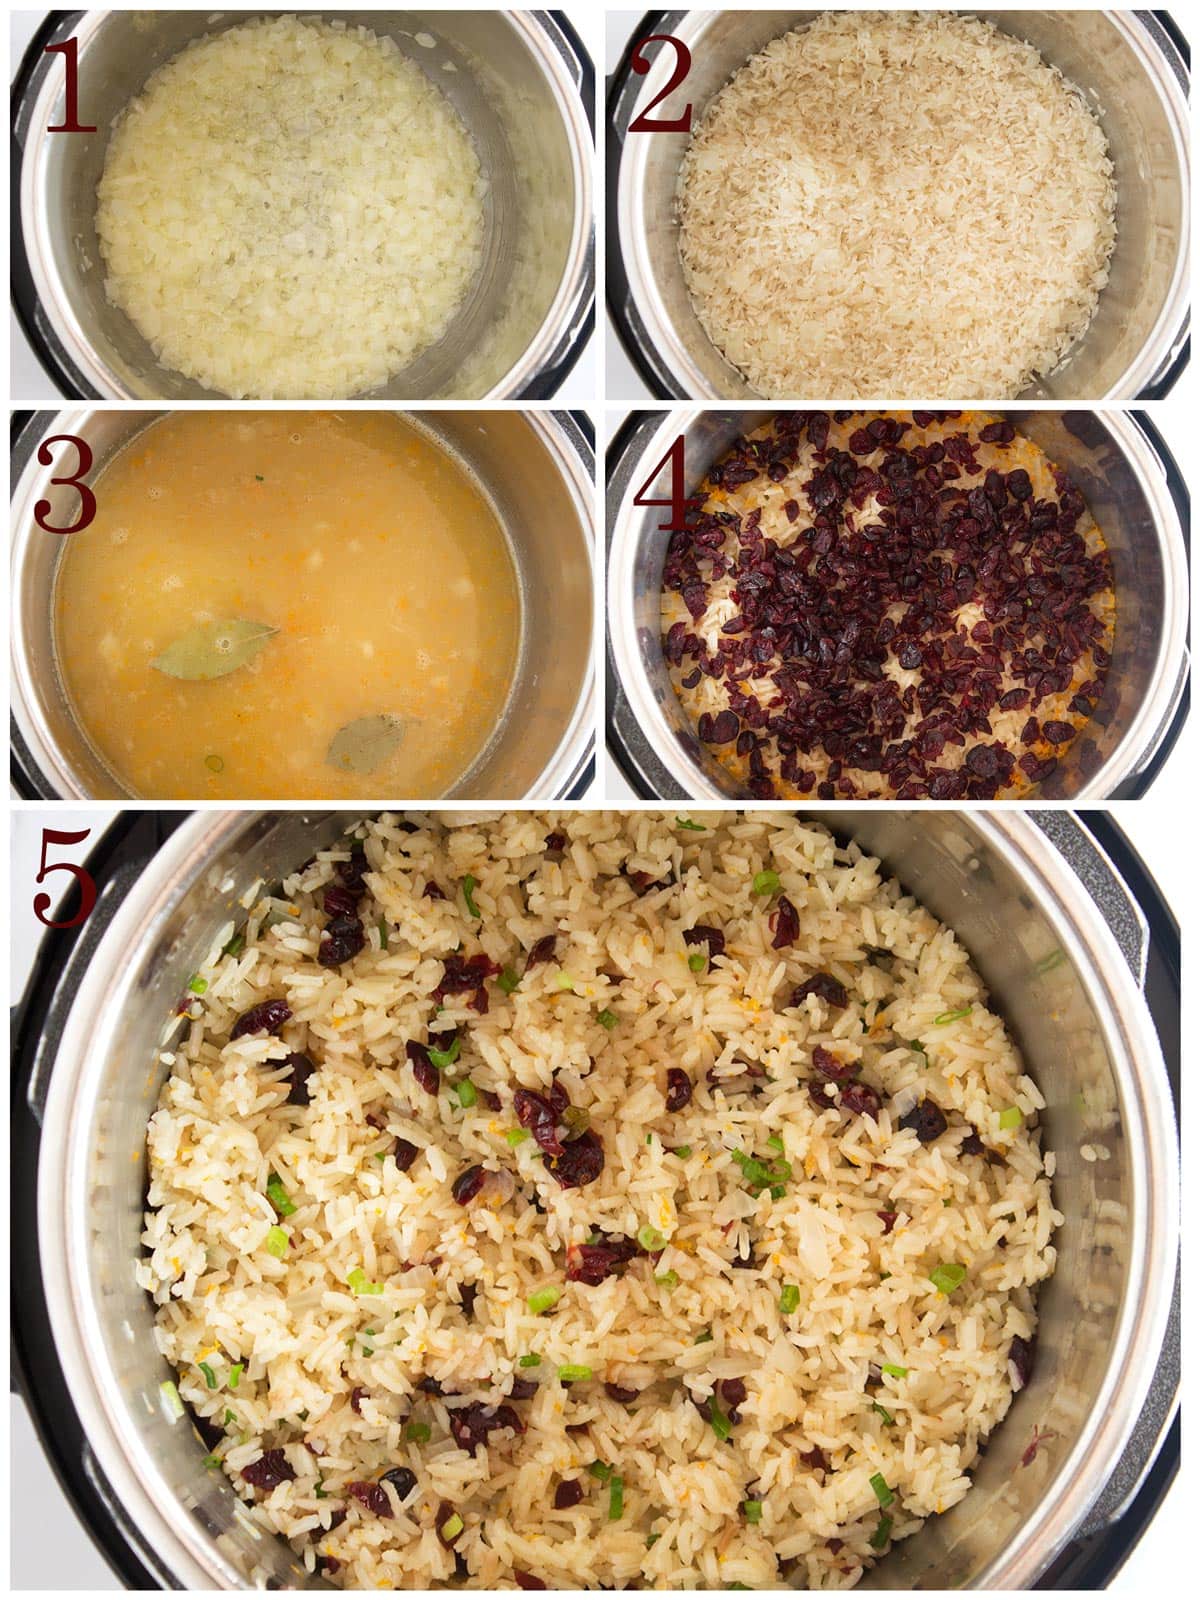 Five steps showing how to make orange rice in an instant pot.